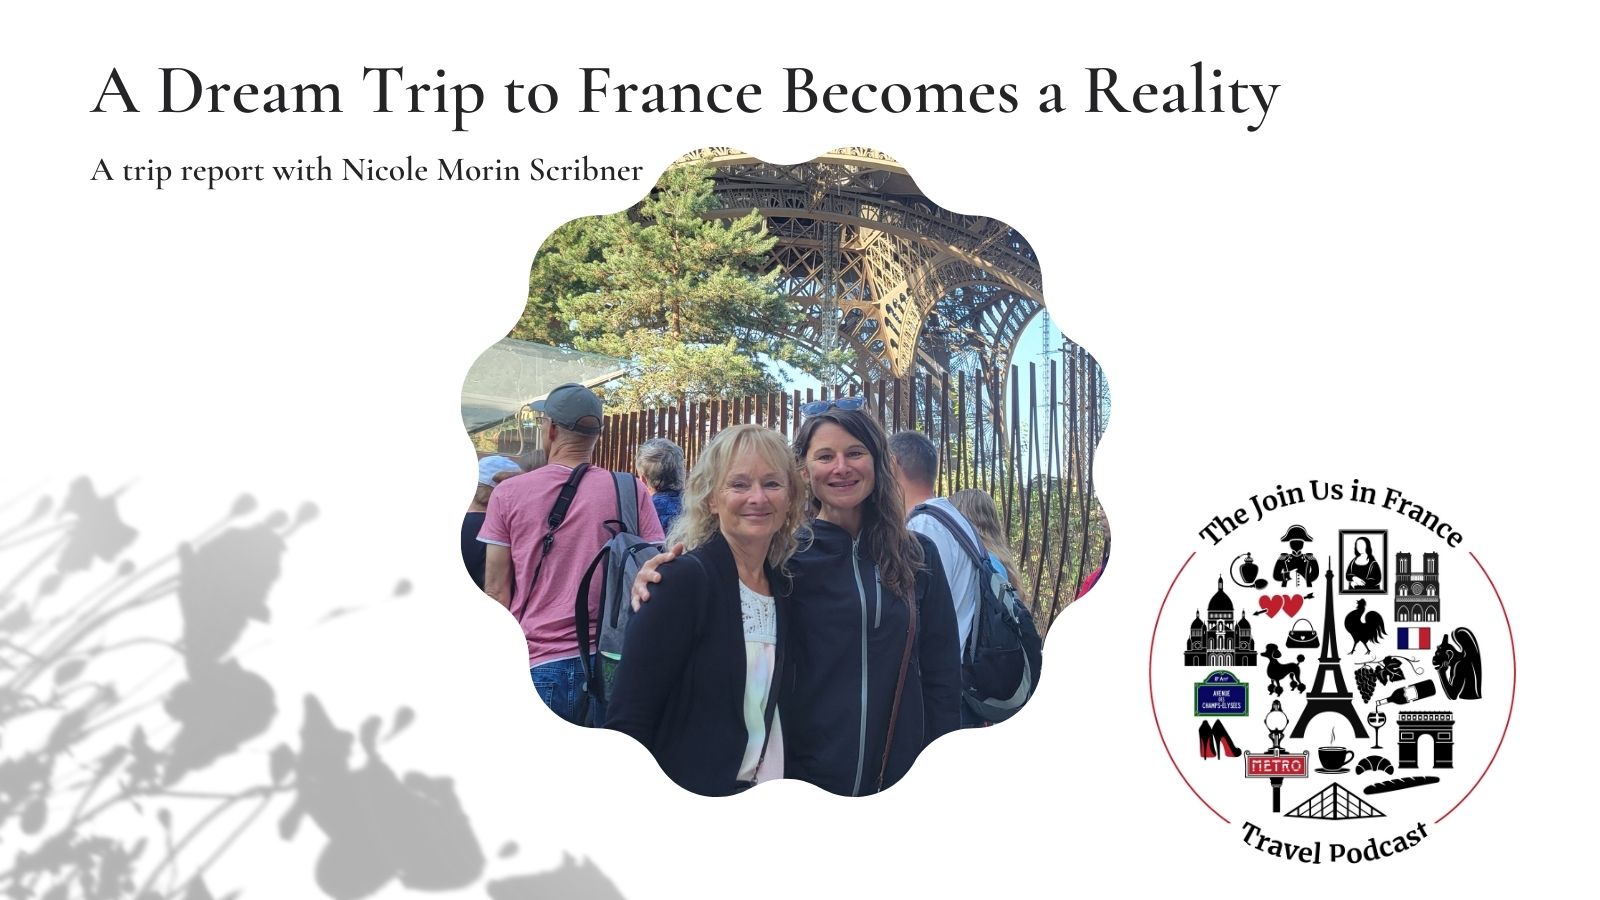 Nicole and her daughter at the foot of the Eiffel Tower: a dream trip to France becomes a reality episode